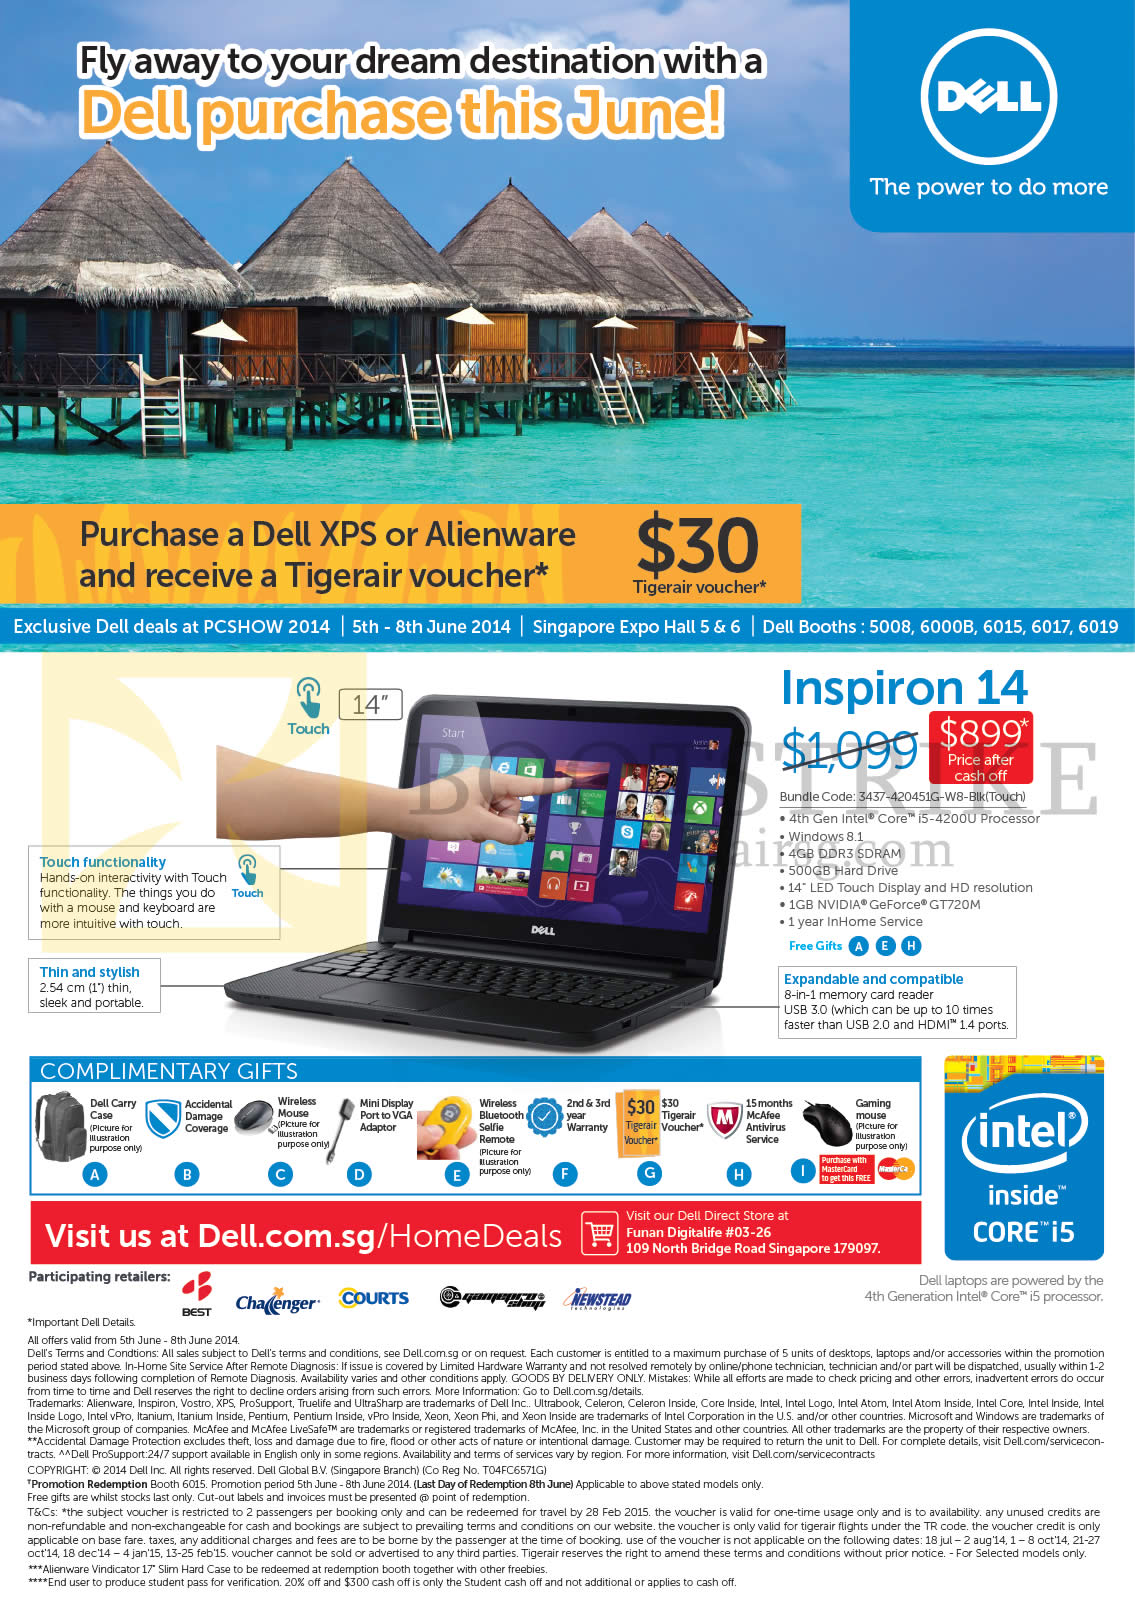 PC SHOW 2014 price list image brochure of Dell Notebook Inspiron 14, TigerAir